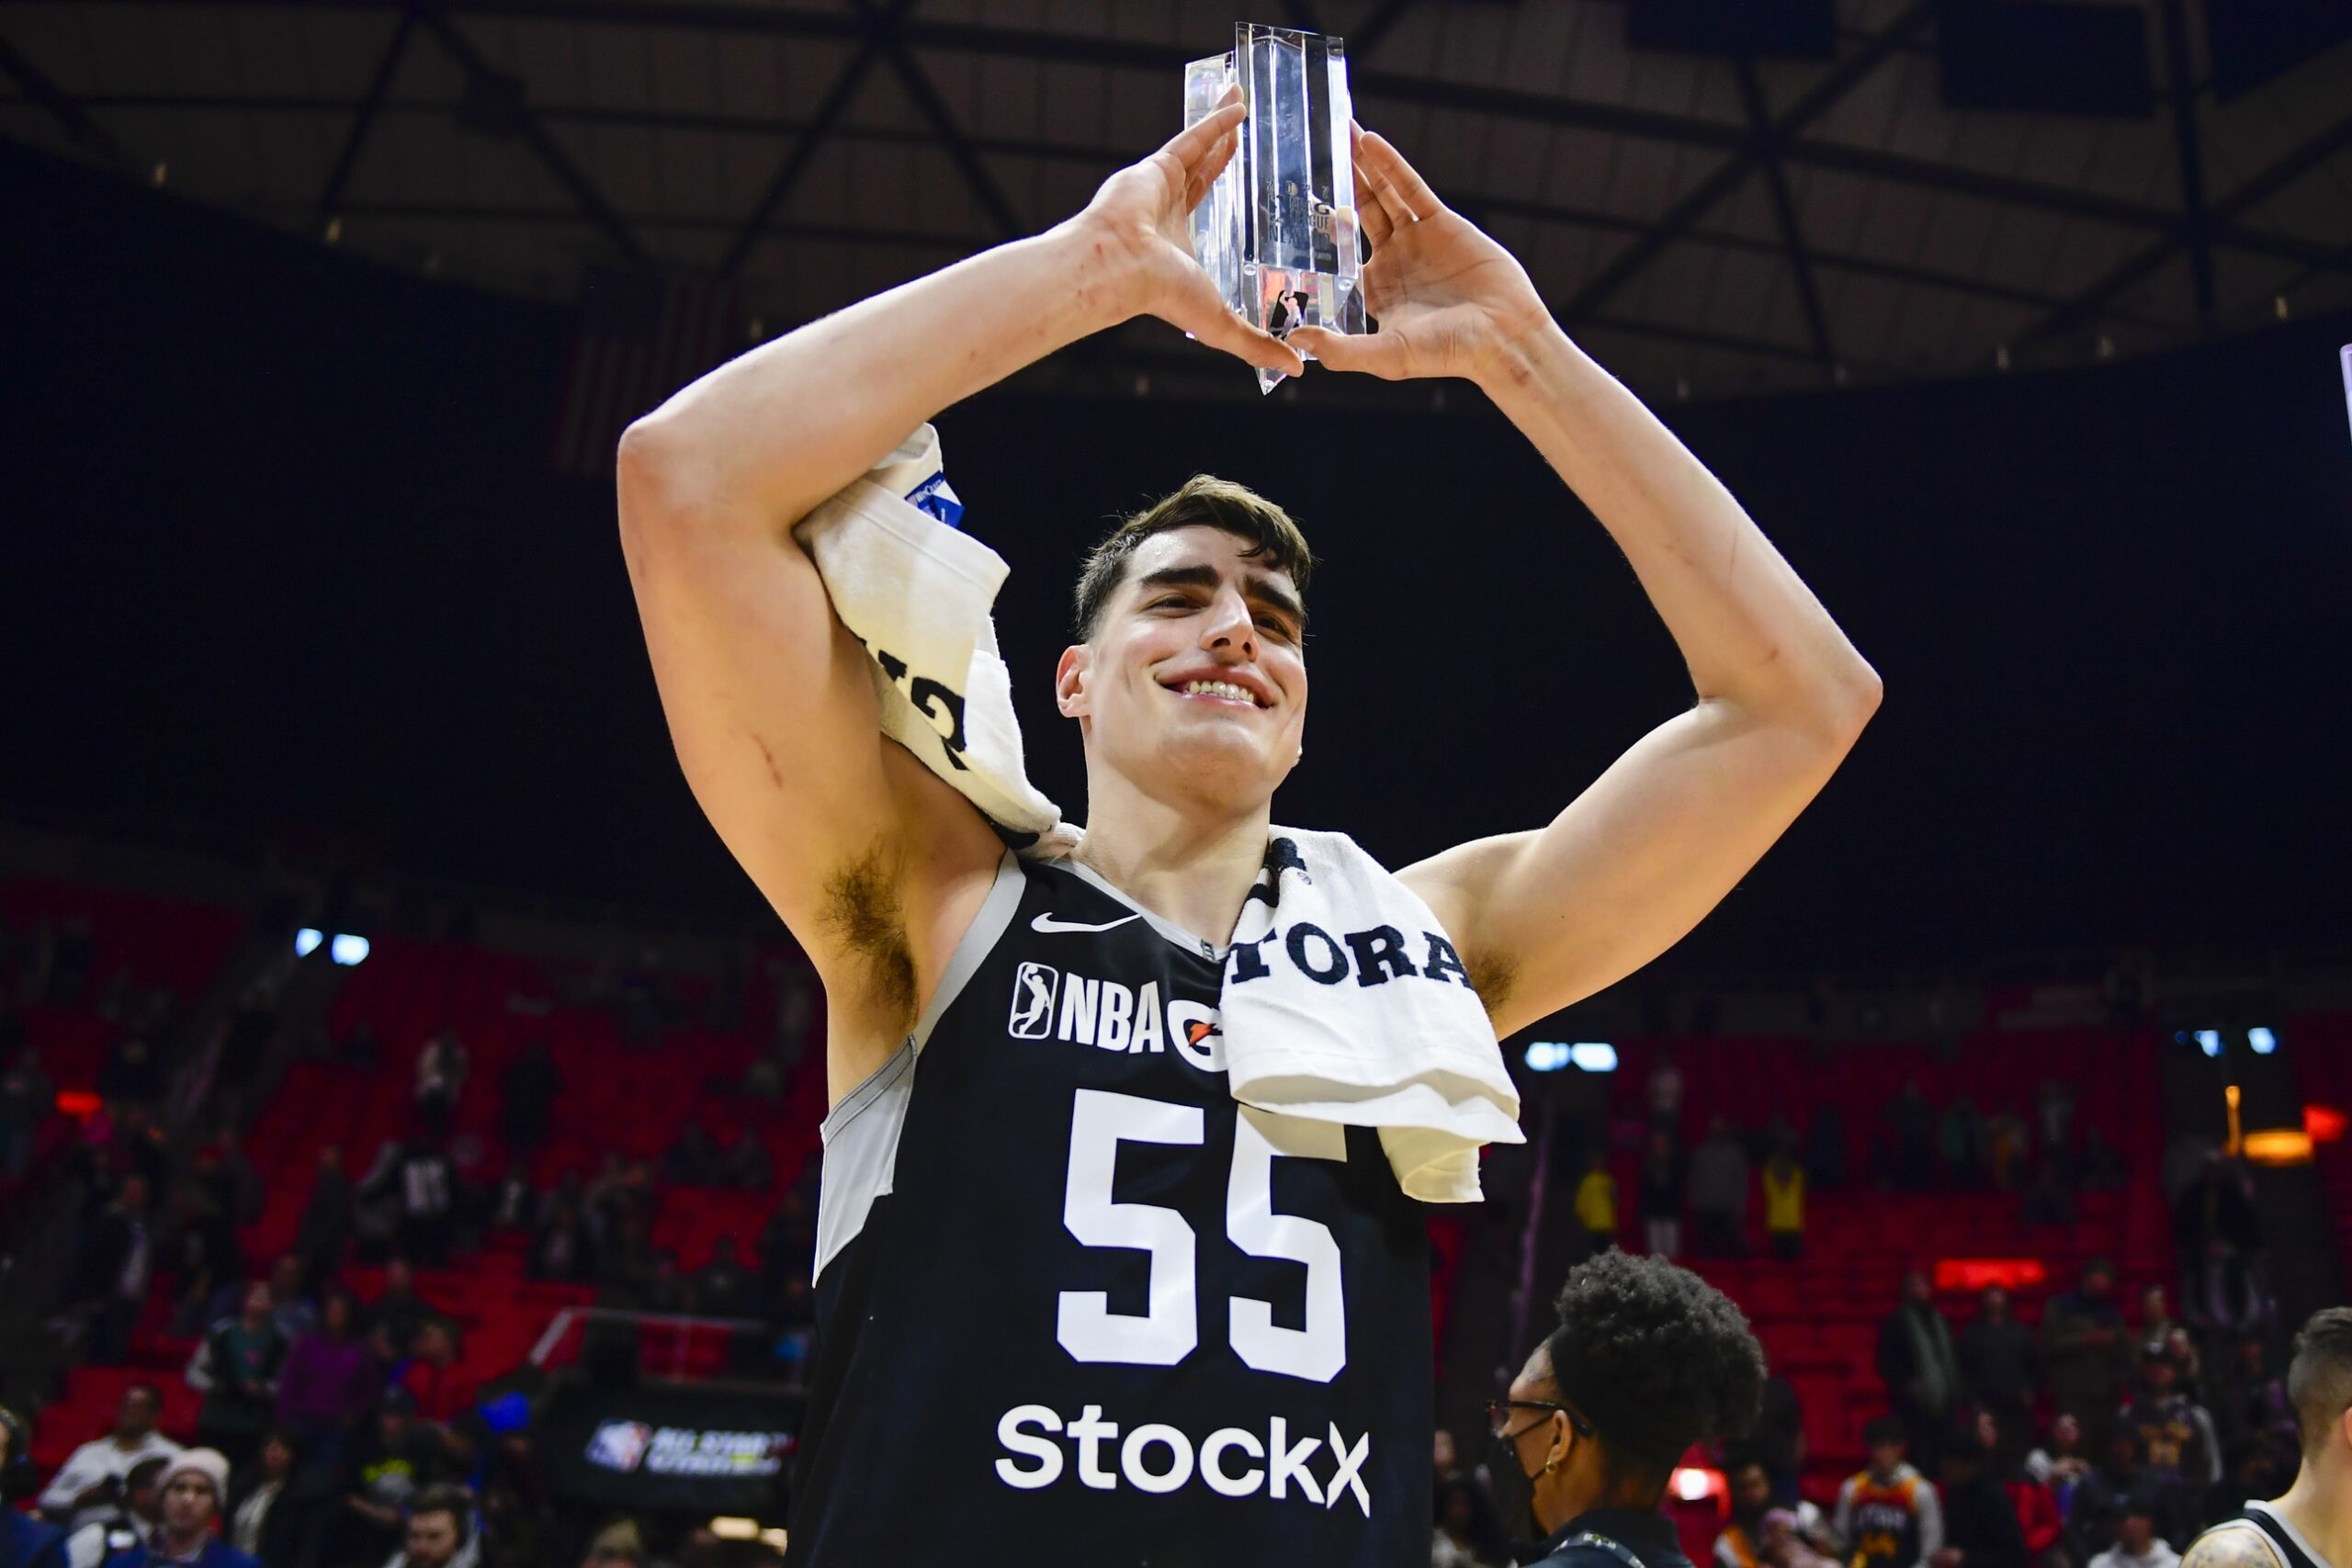 NBA G-League Up Next game appears to be another big showcase especially for Luka Garza.